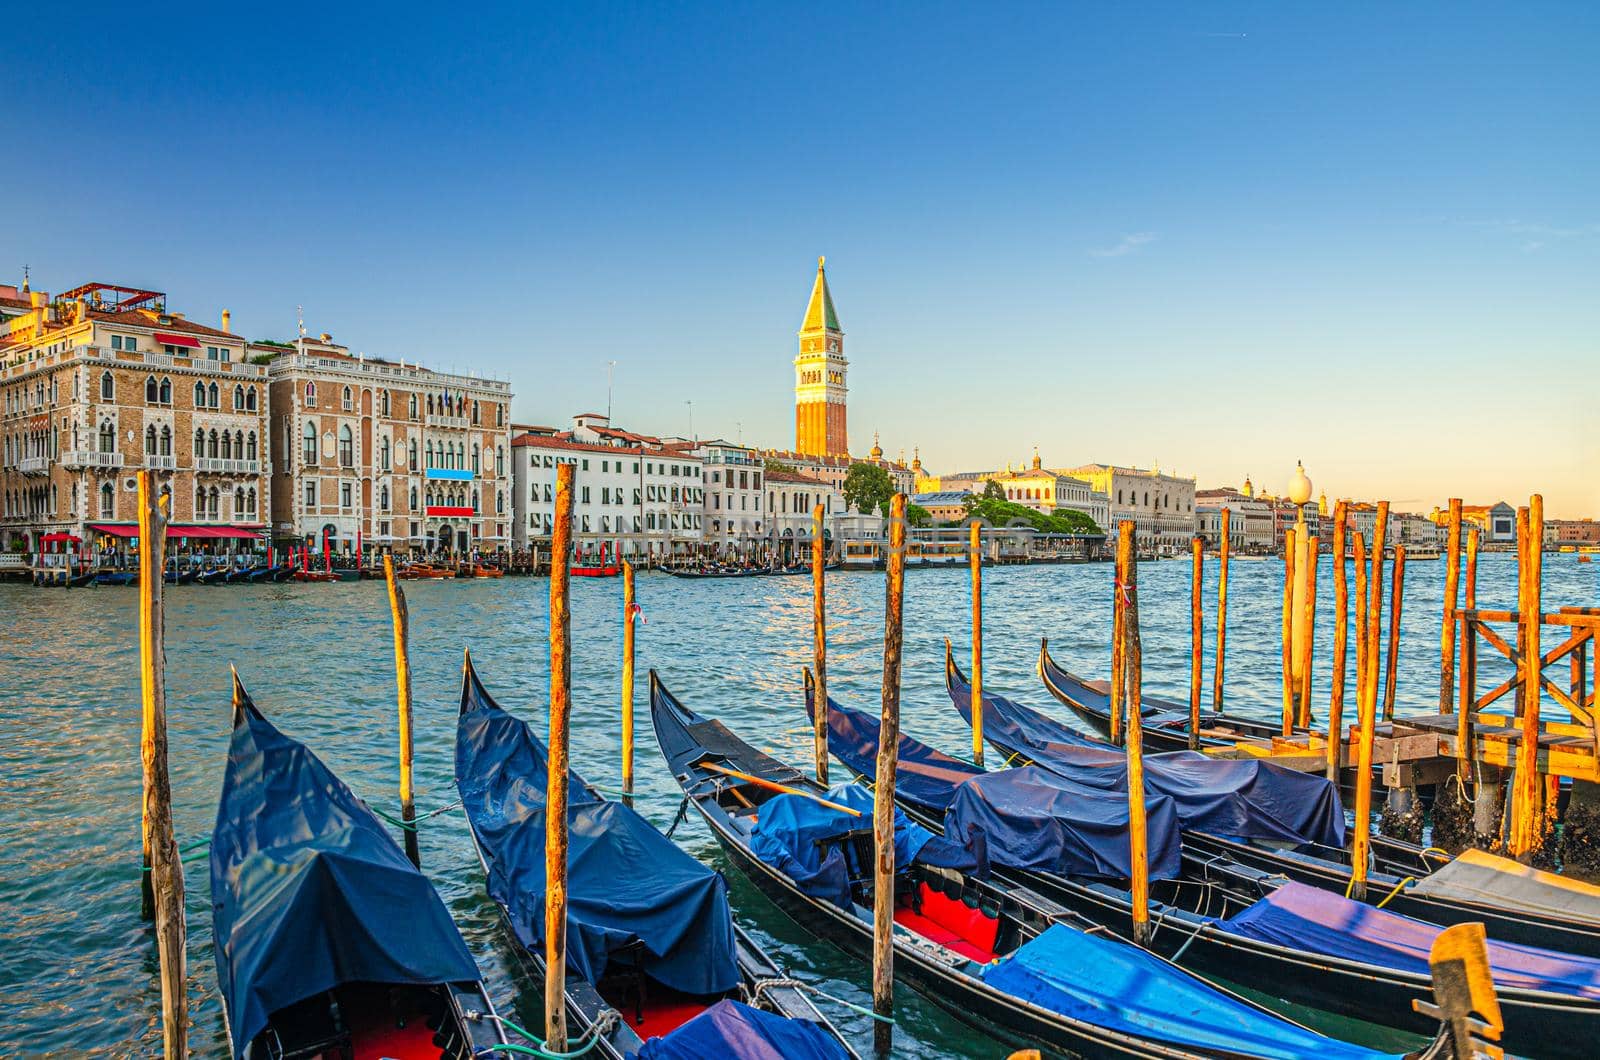 Gondolas moored in water of Grand Canal waterway in Venice by Aliaksandr_Antanovich